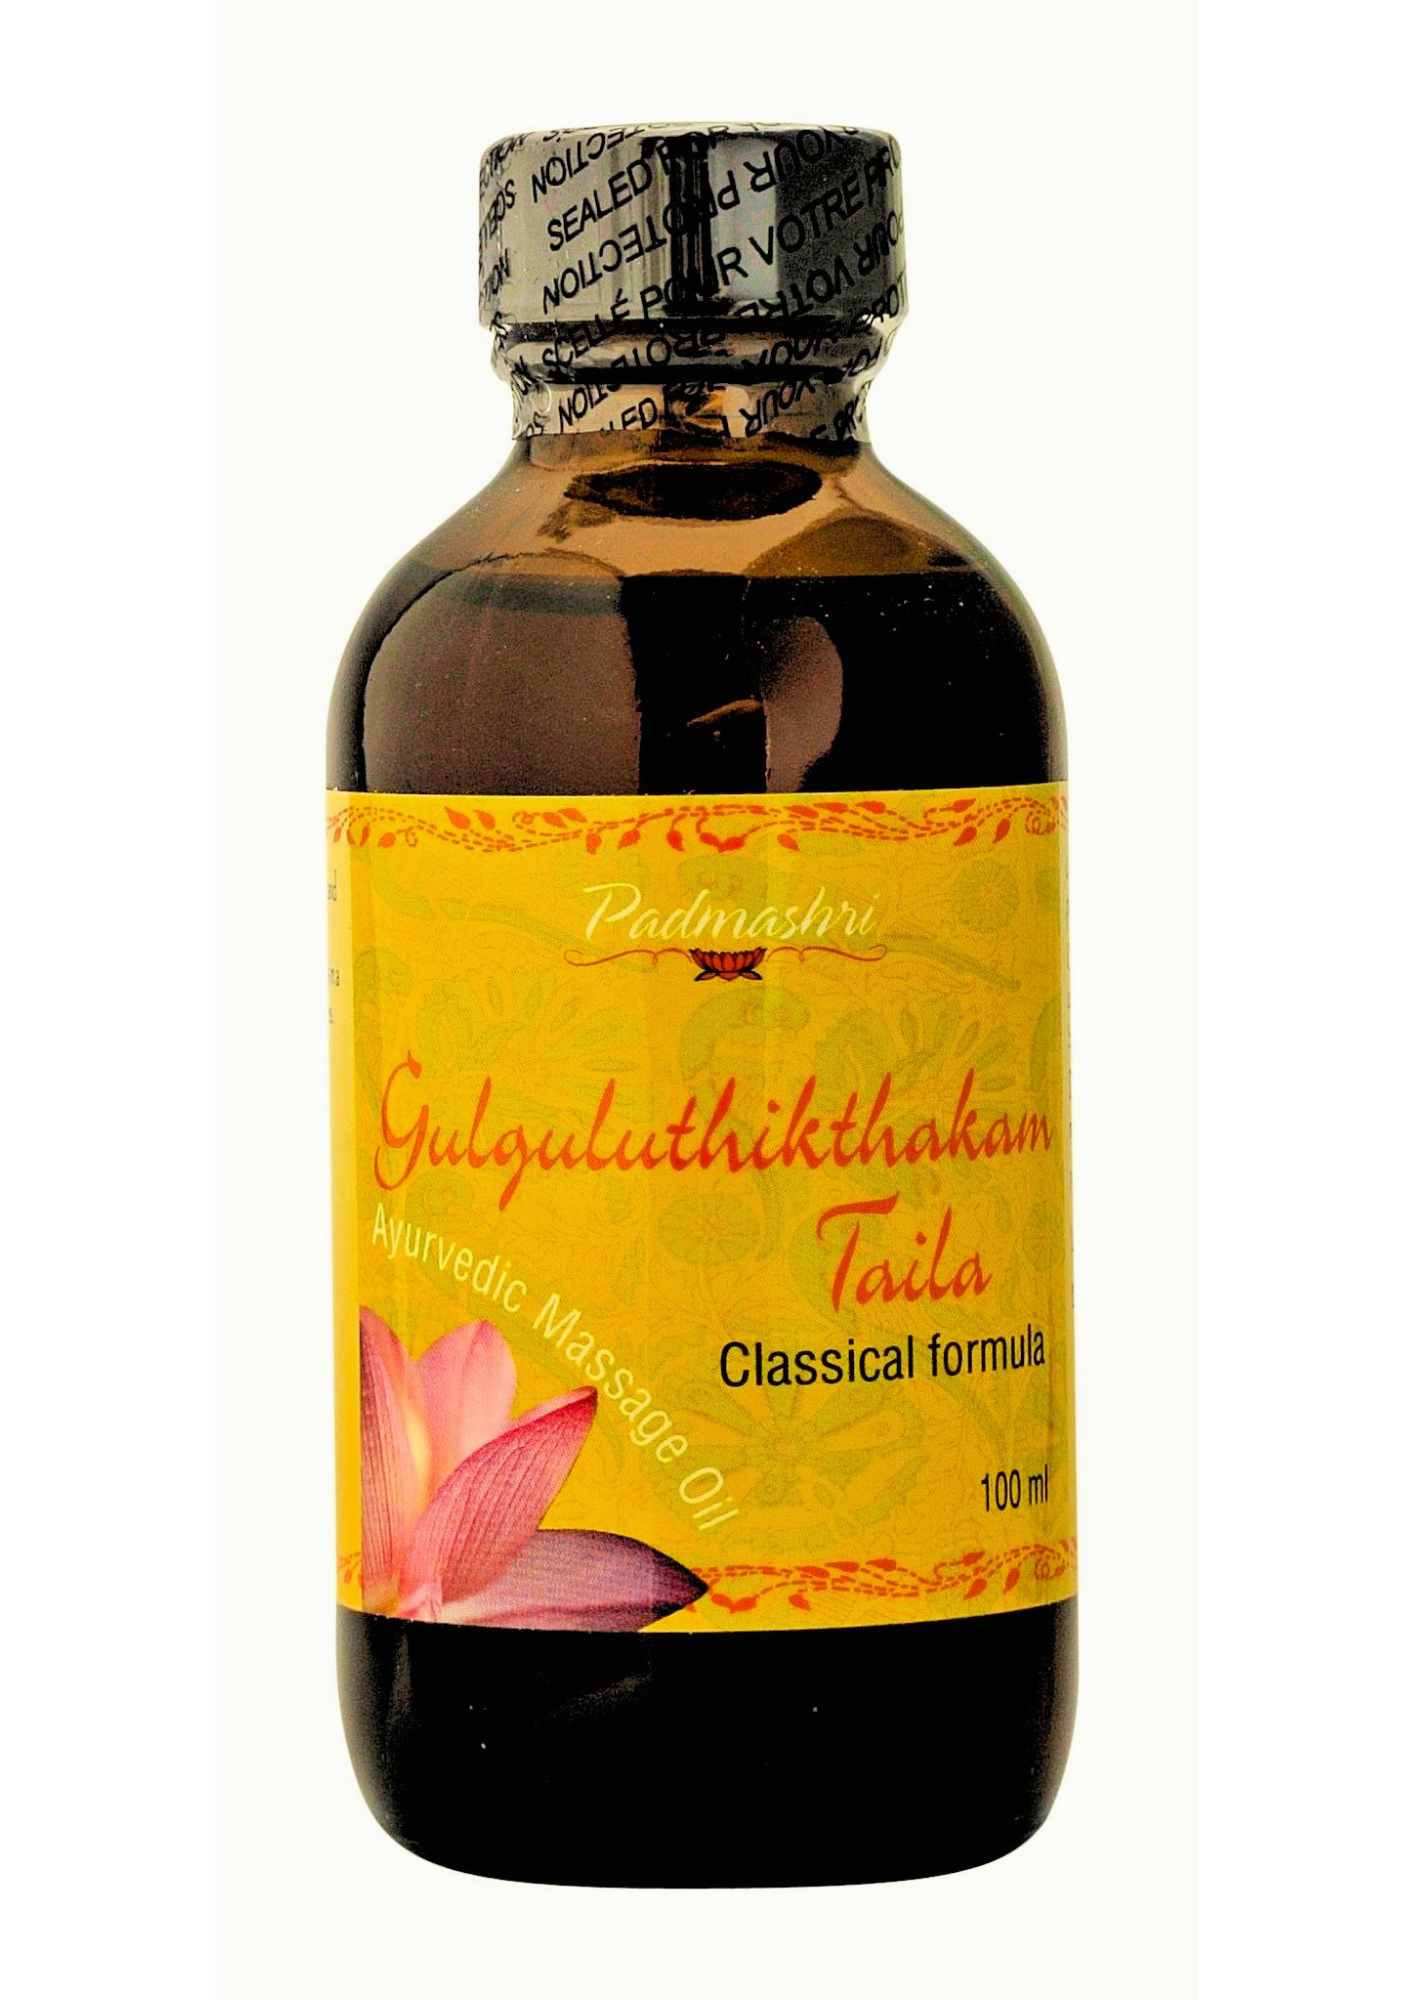 Ayurvedic Gulguluthikthakam Classical Massage Oil - Suitable for professional use in wellness clinics as well as self-care. It provides essential nourishment and moisture to the skin. Eco-friendly, cruelty-free, and not tested on animals. Absorbs quickly to lock in moisture for superior hydration.